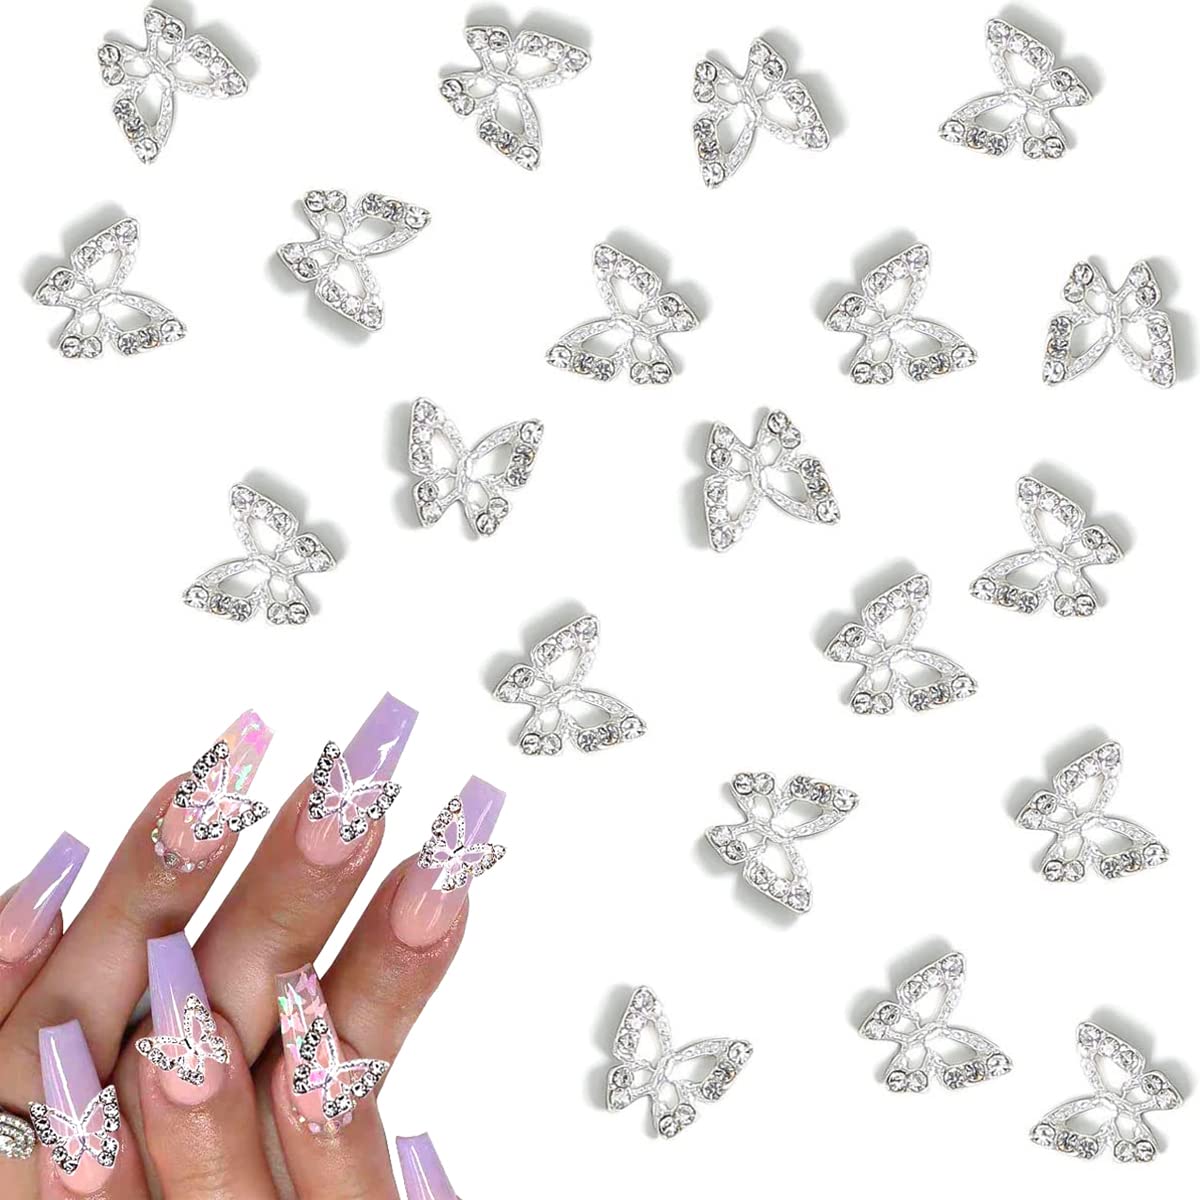 90 PCS 3D Butterfly Nail Rhinestones Charms Sliver Metal Acrylic Nail Art  Alloy Shiny Crystals Gems Diamonds Nail DIY Jewels Accessories Design  Supplies Decoration Set Sliver Butterfly